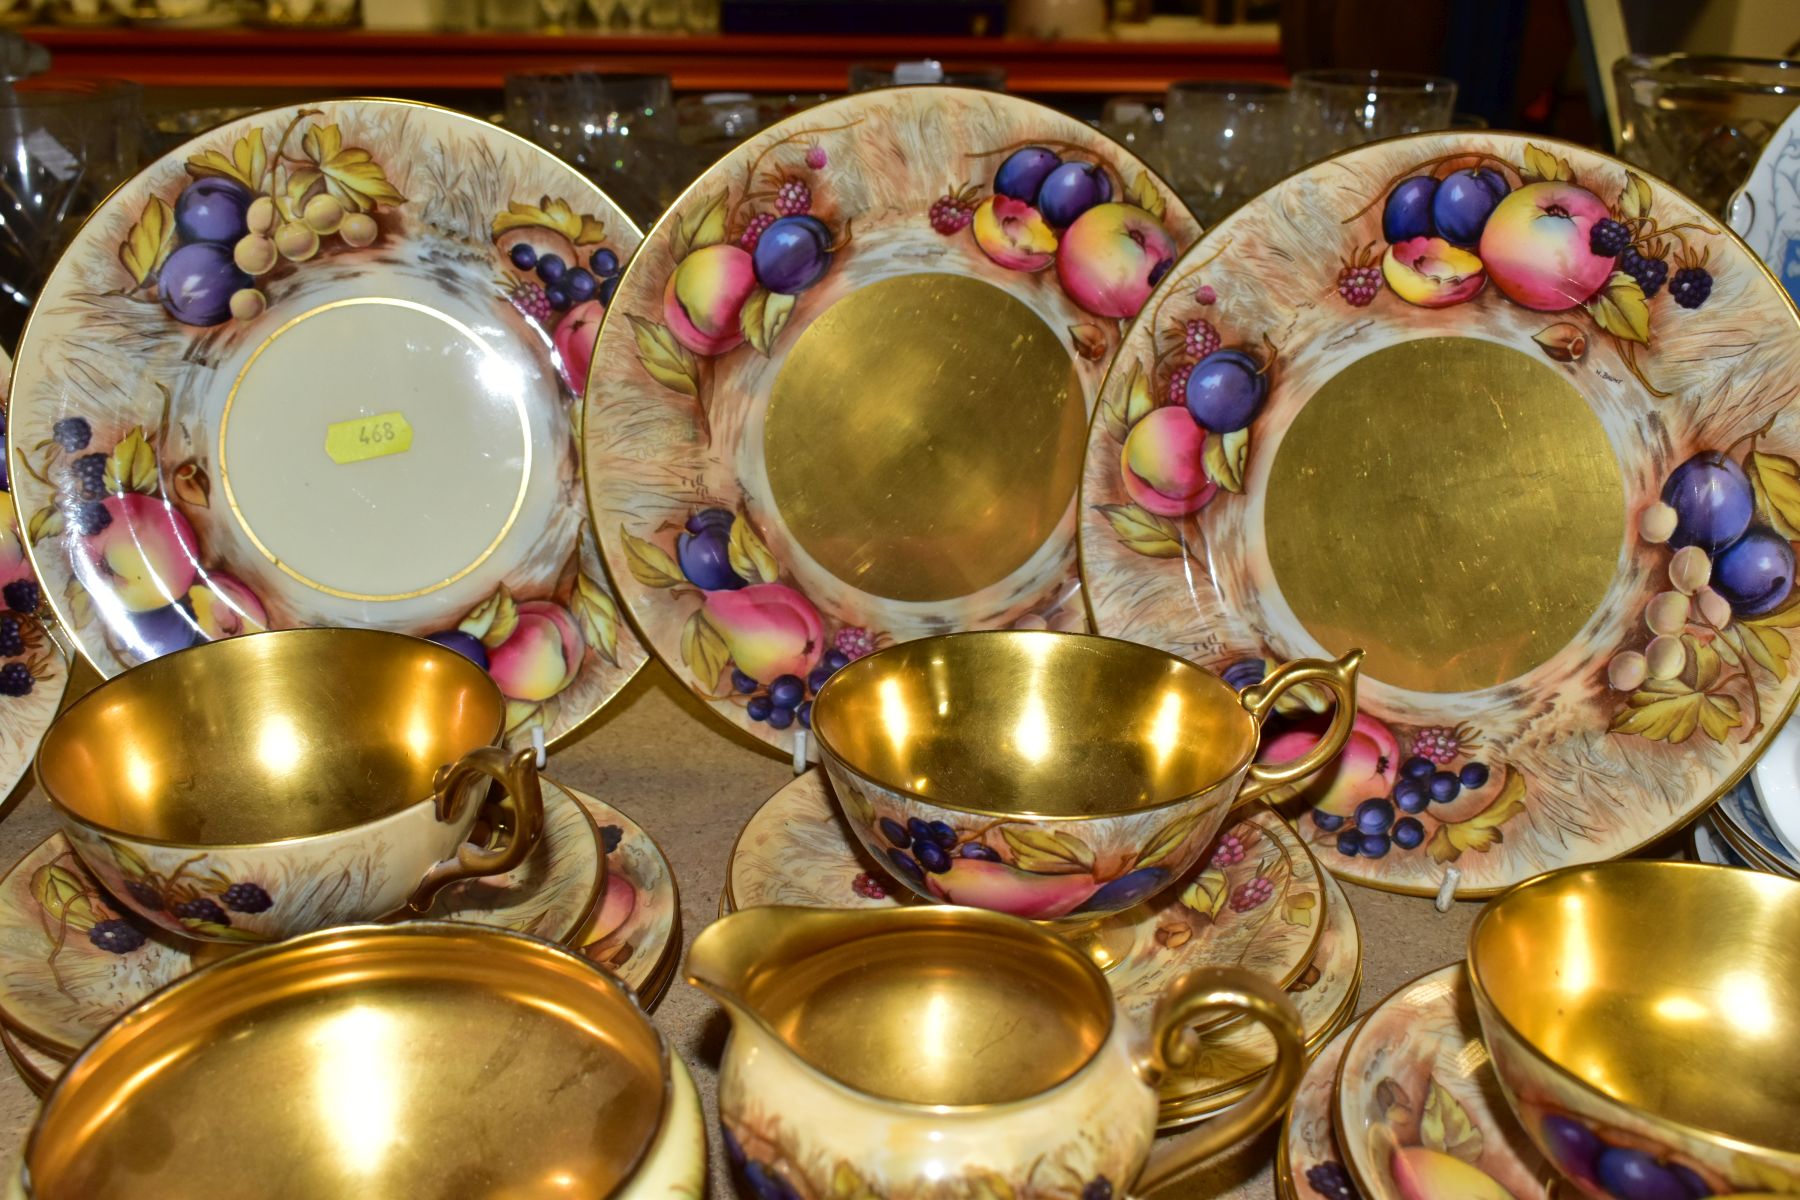 A COLLECTION OF AYNSLEY FRUIT STUDY (ORCHARD GOLD) AND FLOWER STUDY CUPS, SAUCERS, PLATES, VASES, - Image 10 of 13